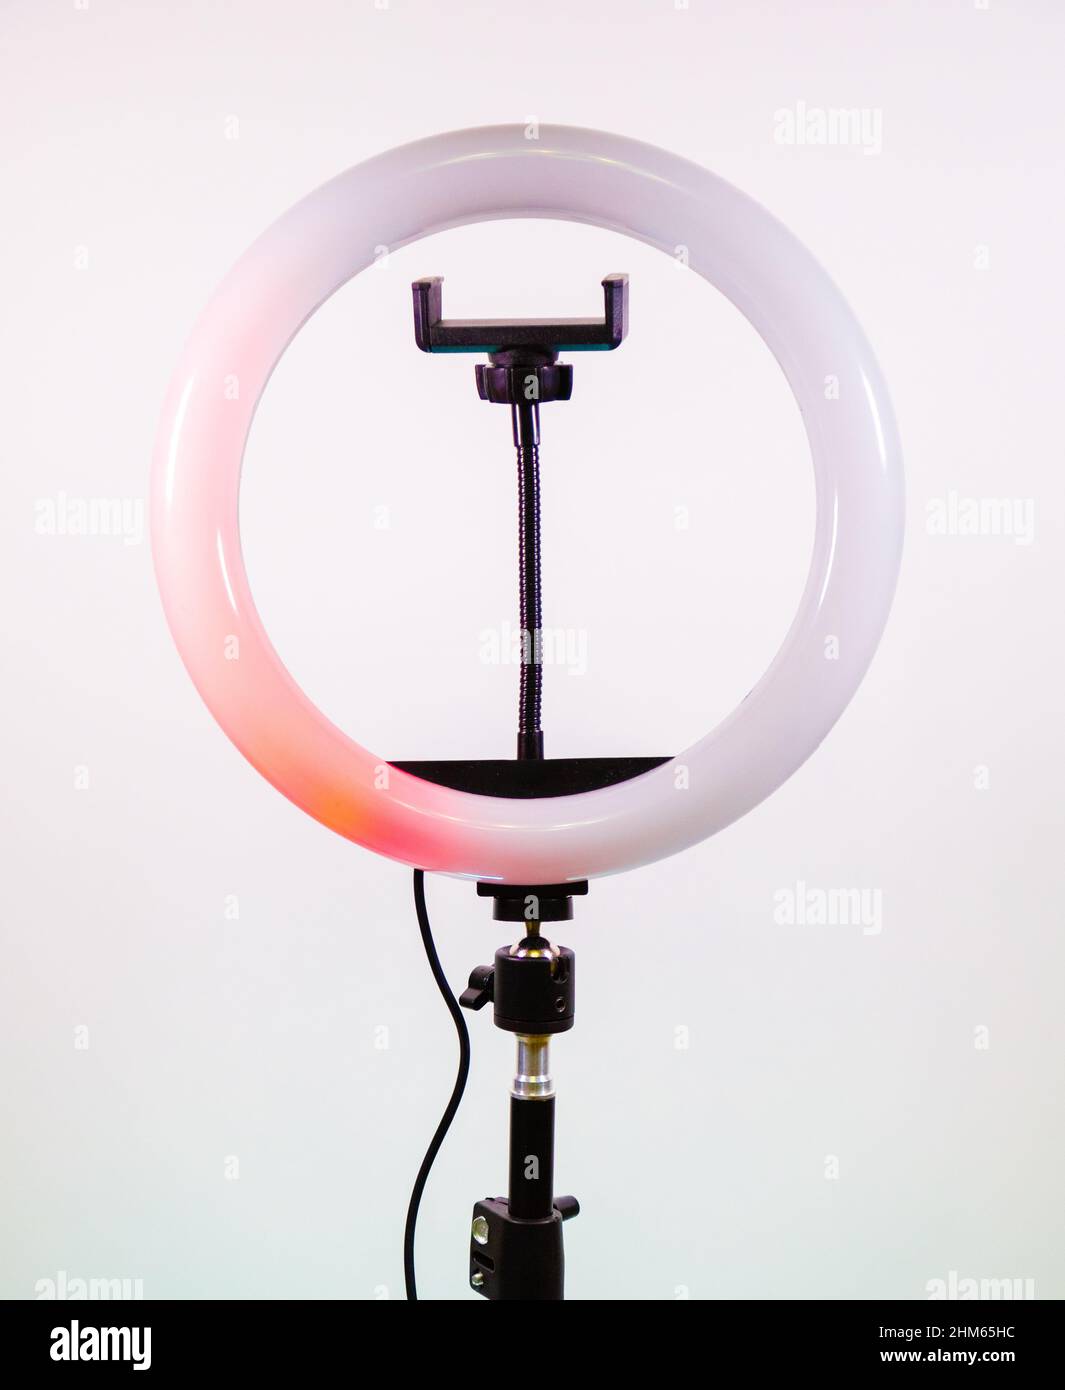 The red light moves in a circle. Ring lamp. Stock Photo